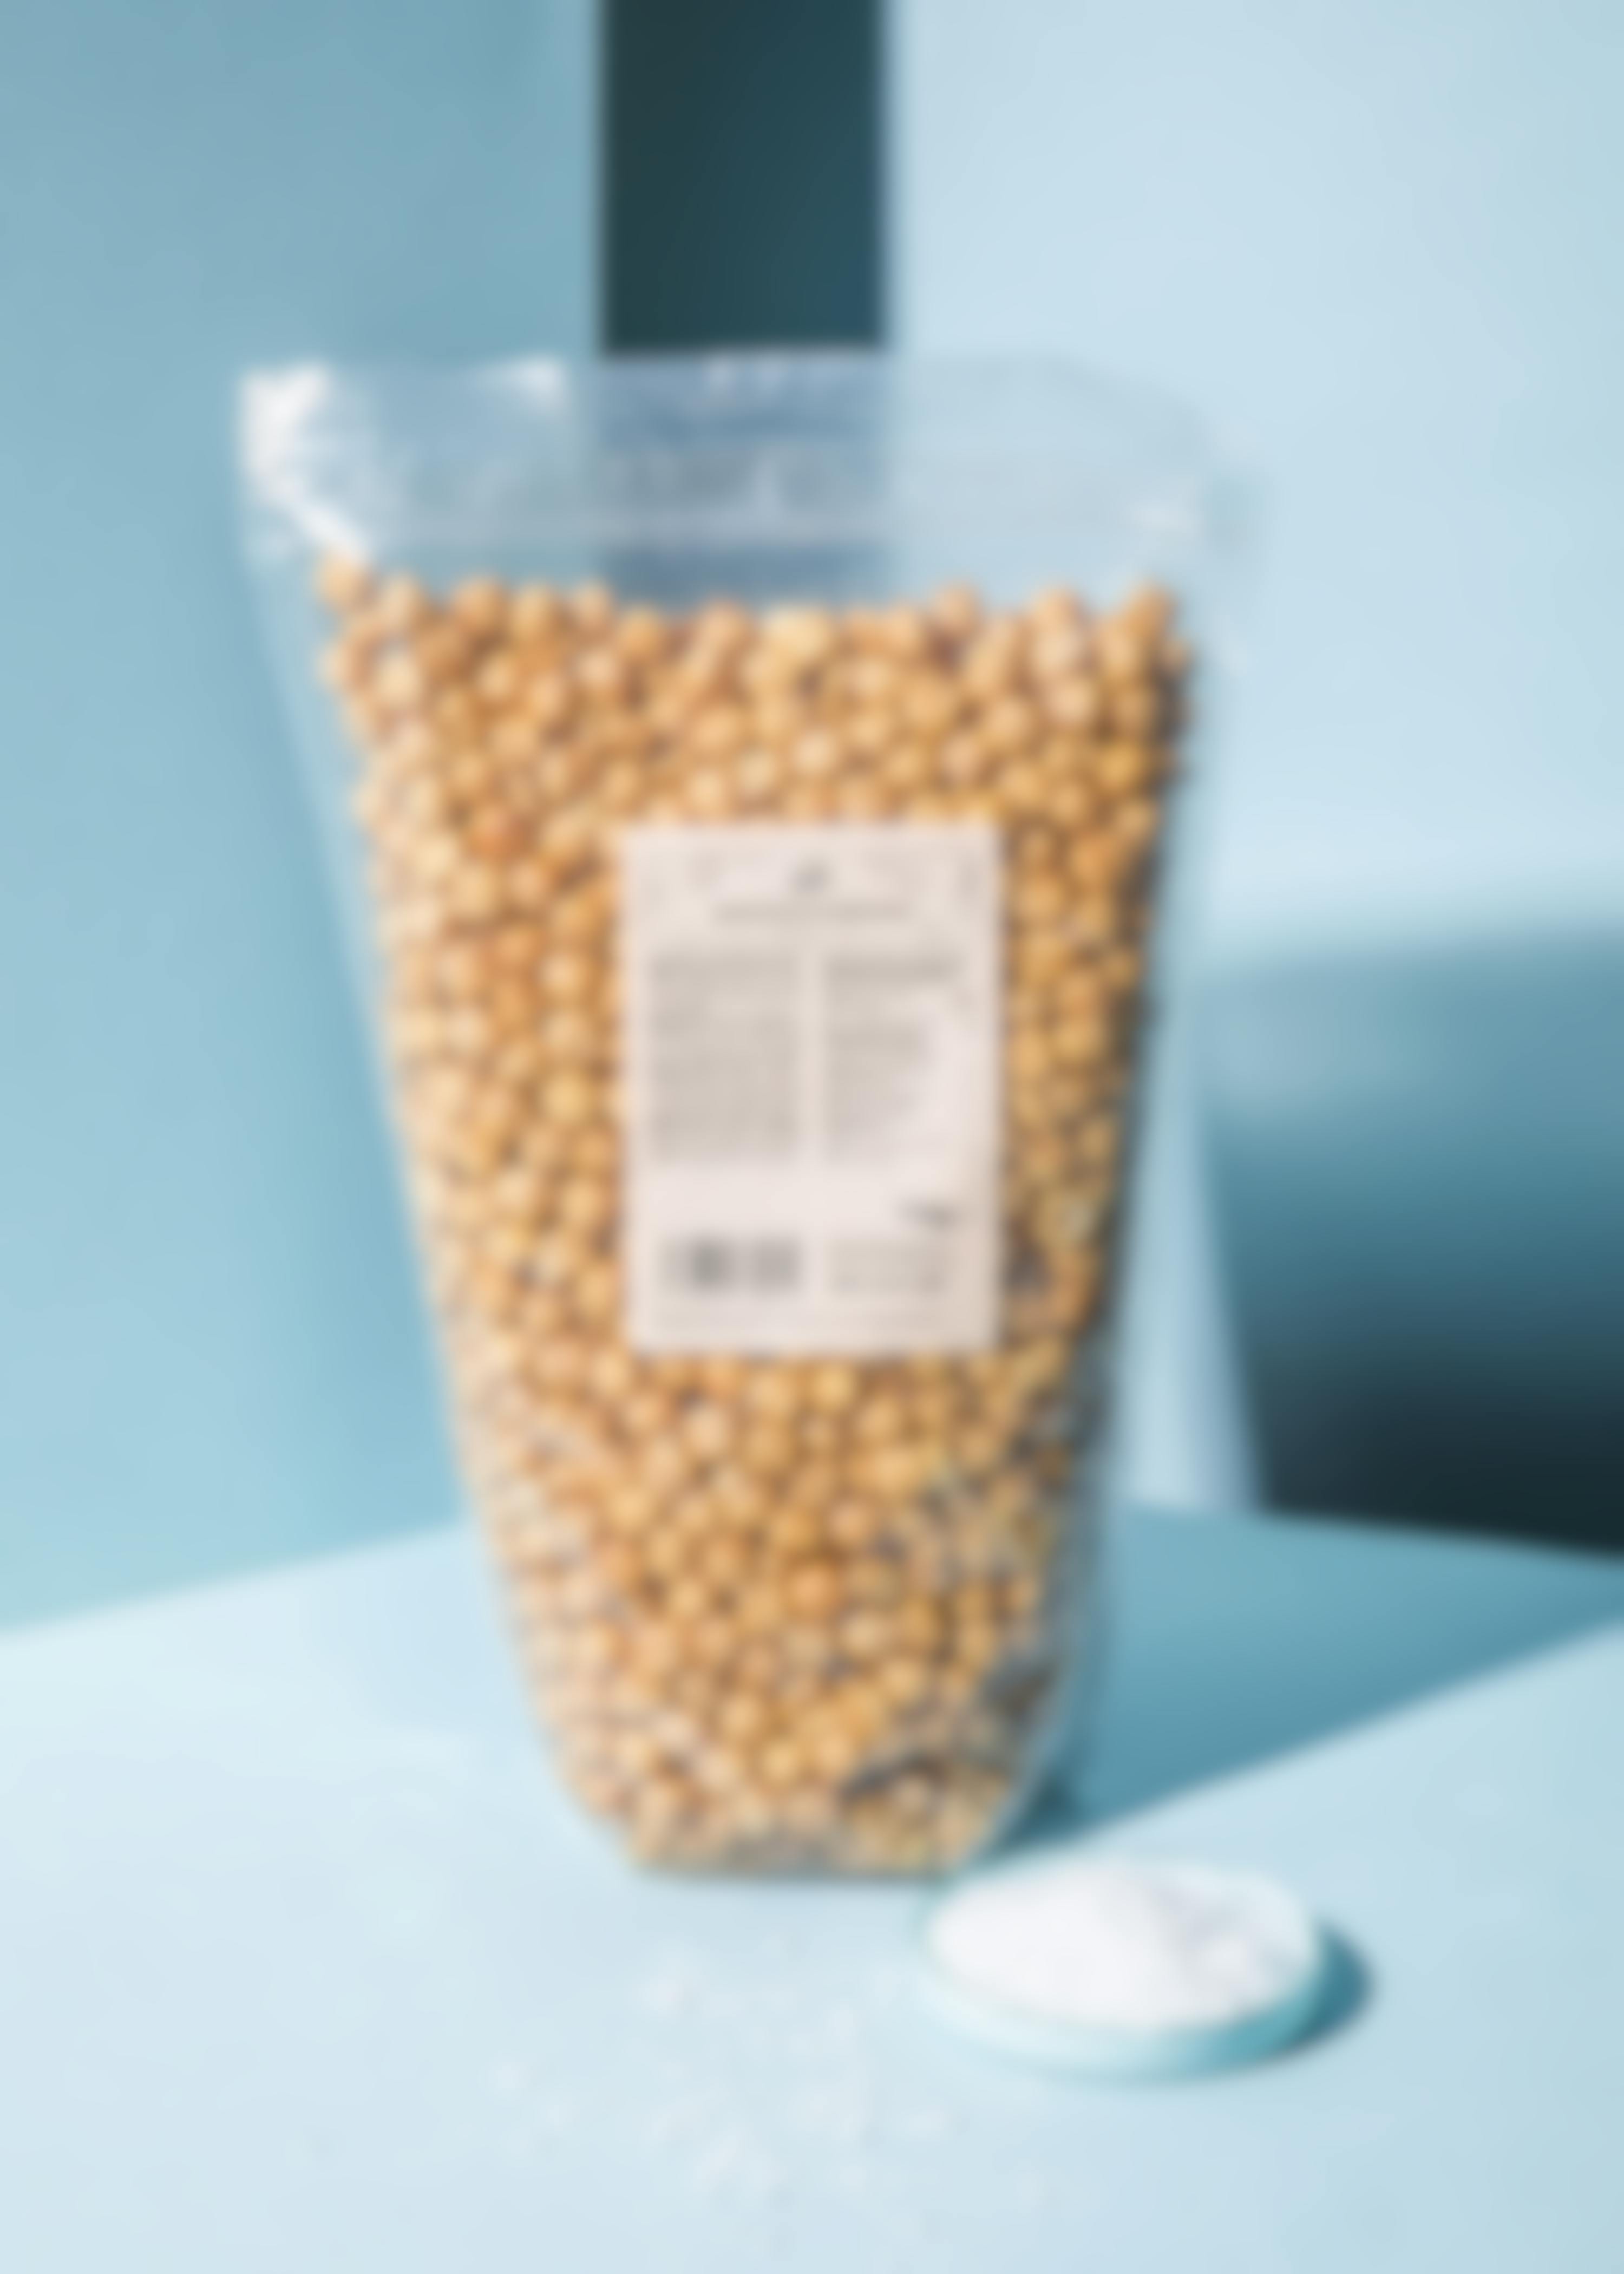 Roasted and salted chickpeas 1kg